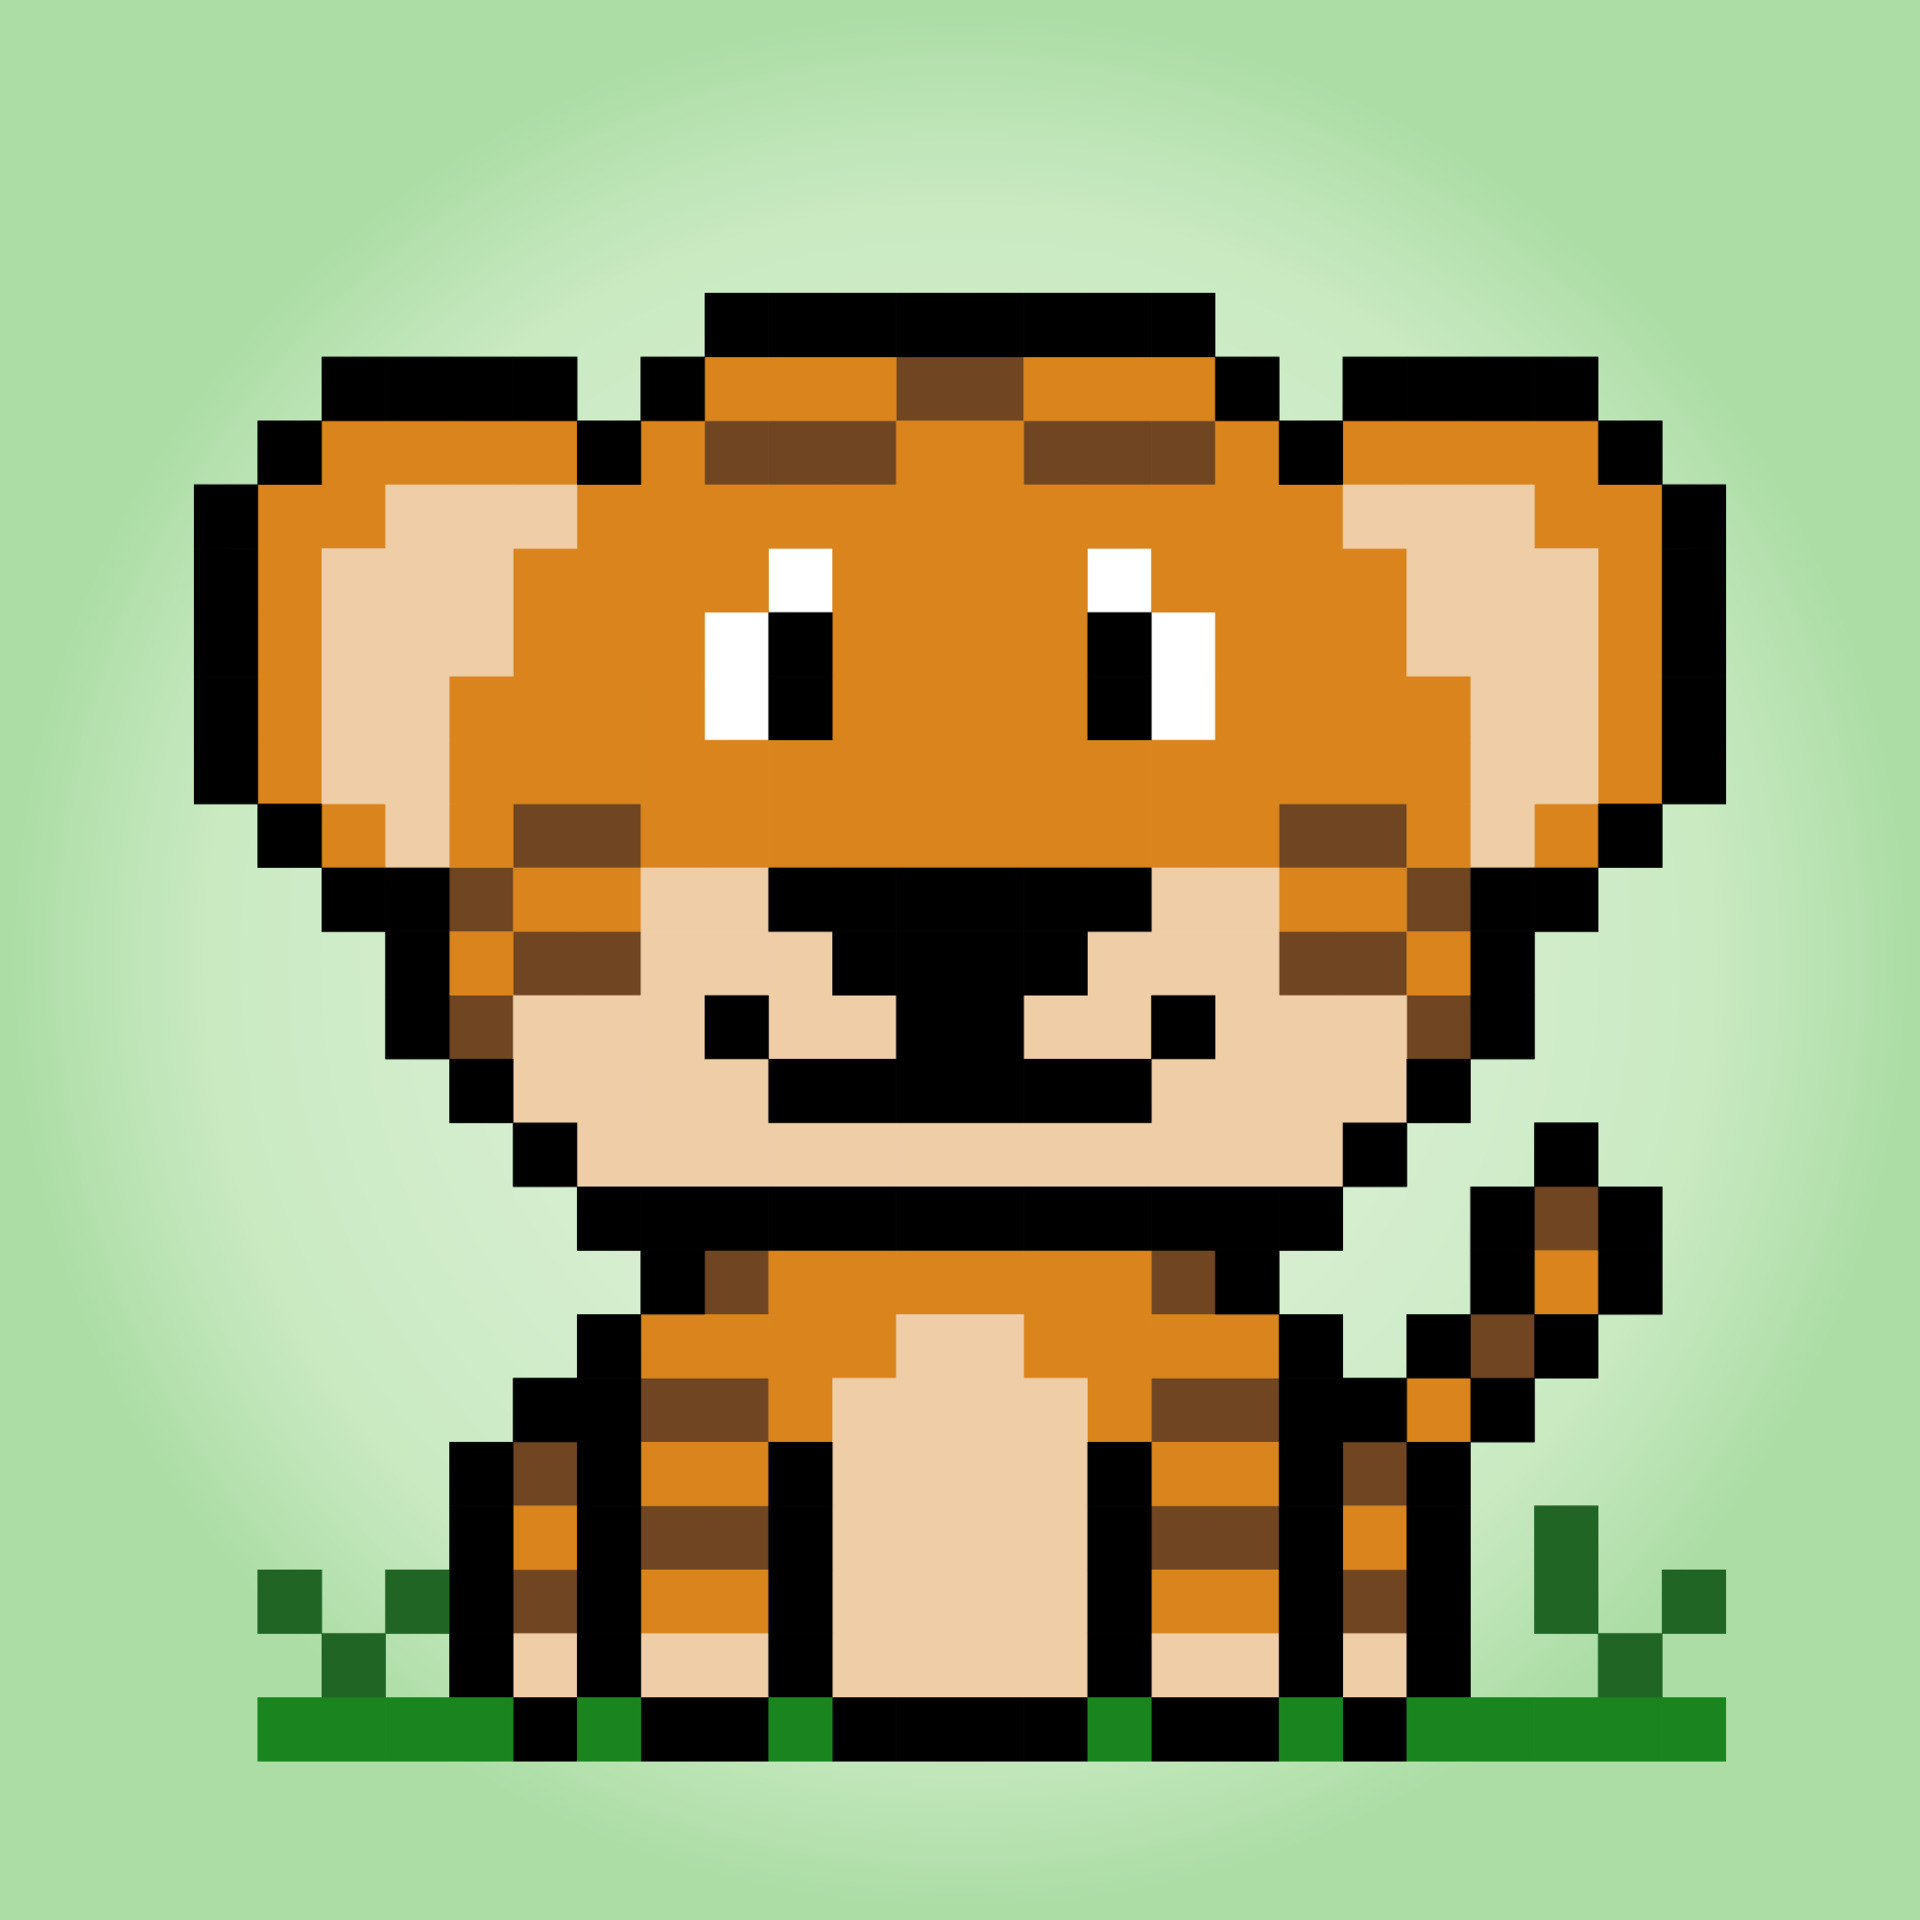 8 bit pixel a tiger. Animals for game assets and cross stitch ...